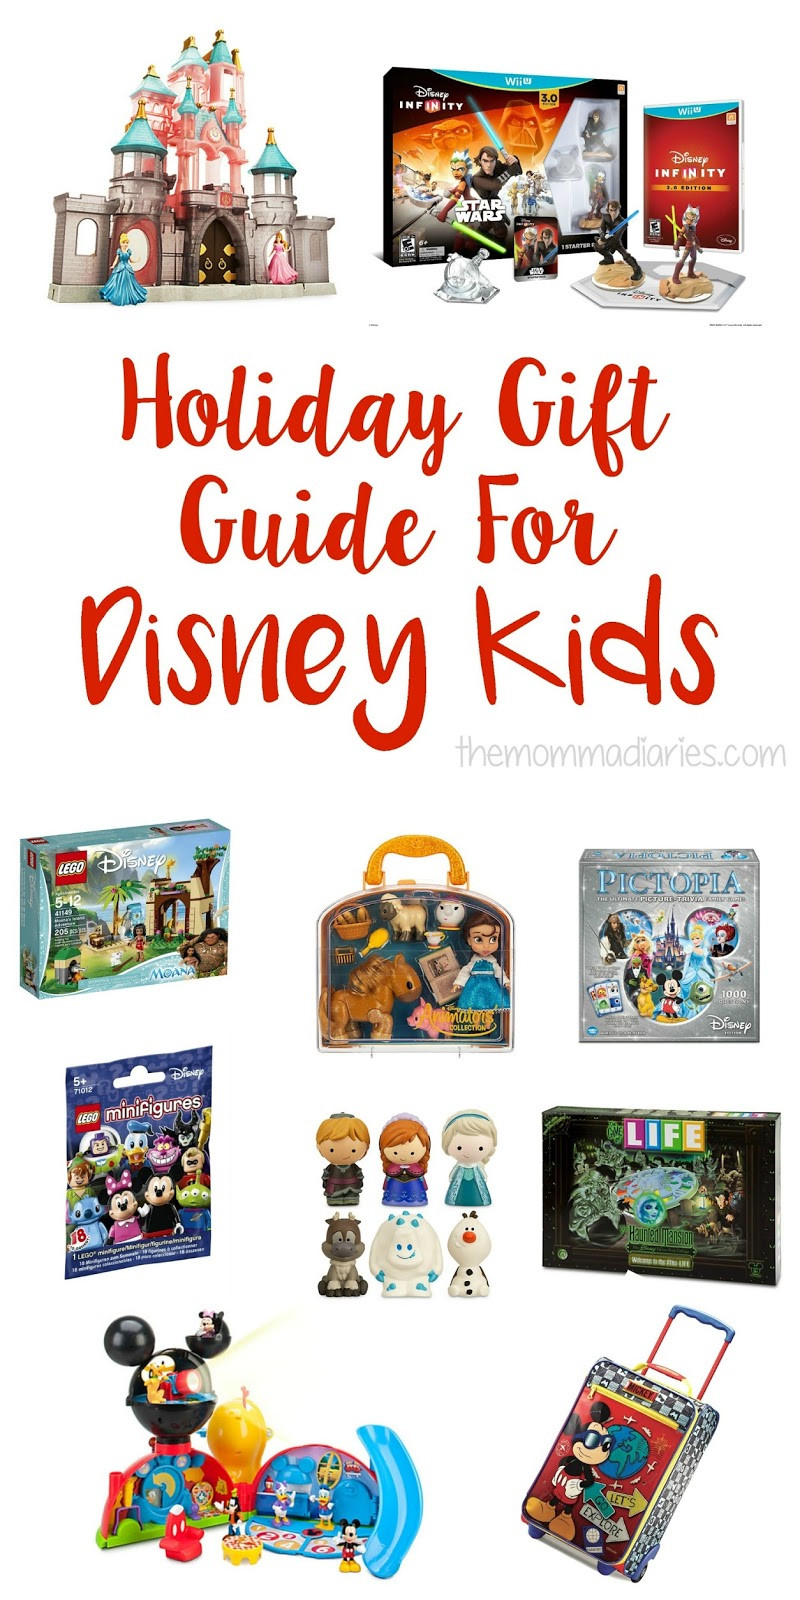 Holiday Gift Guide For Kids
 Holiday Gift Guide For Disney Kids